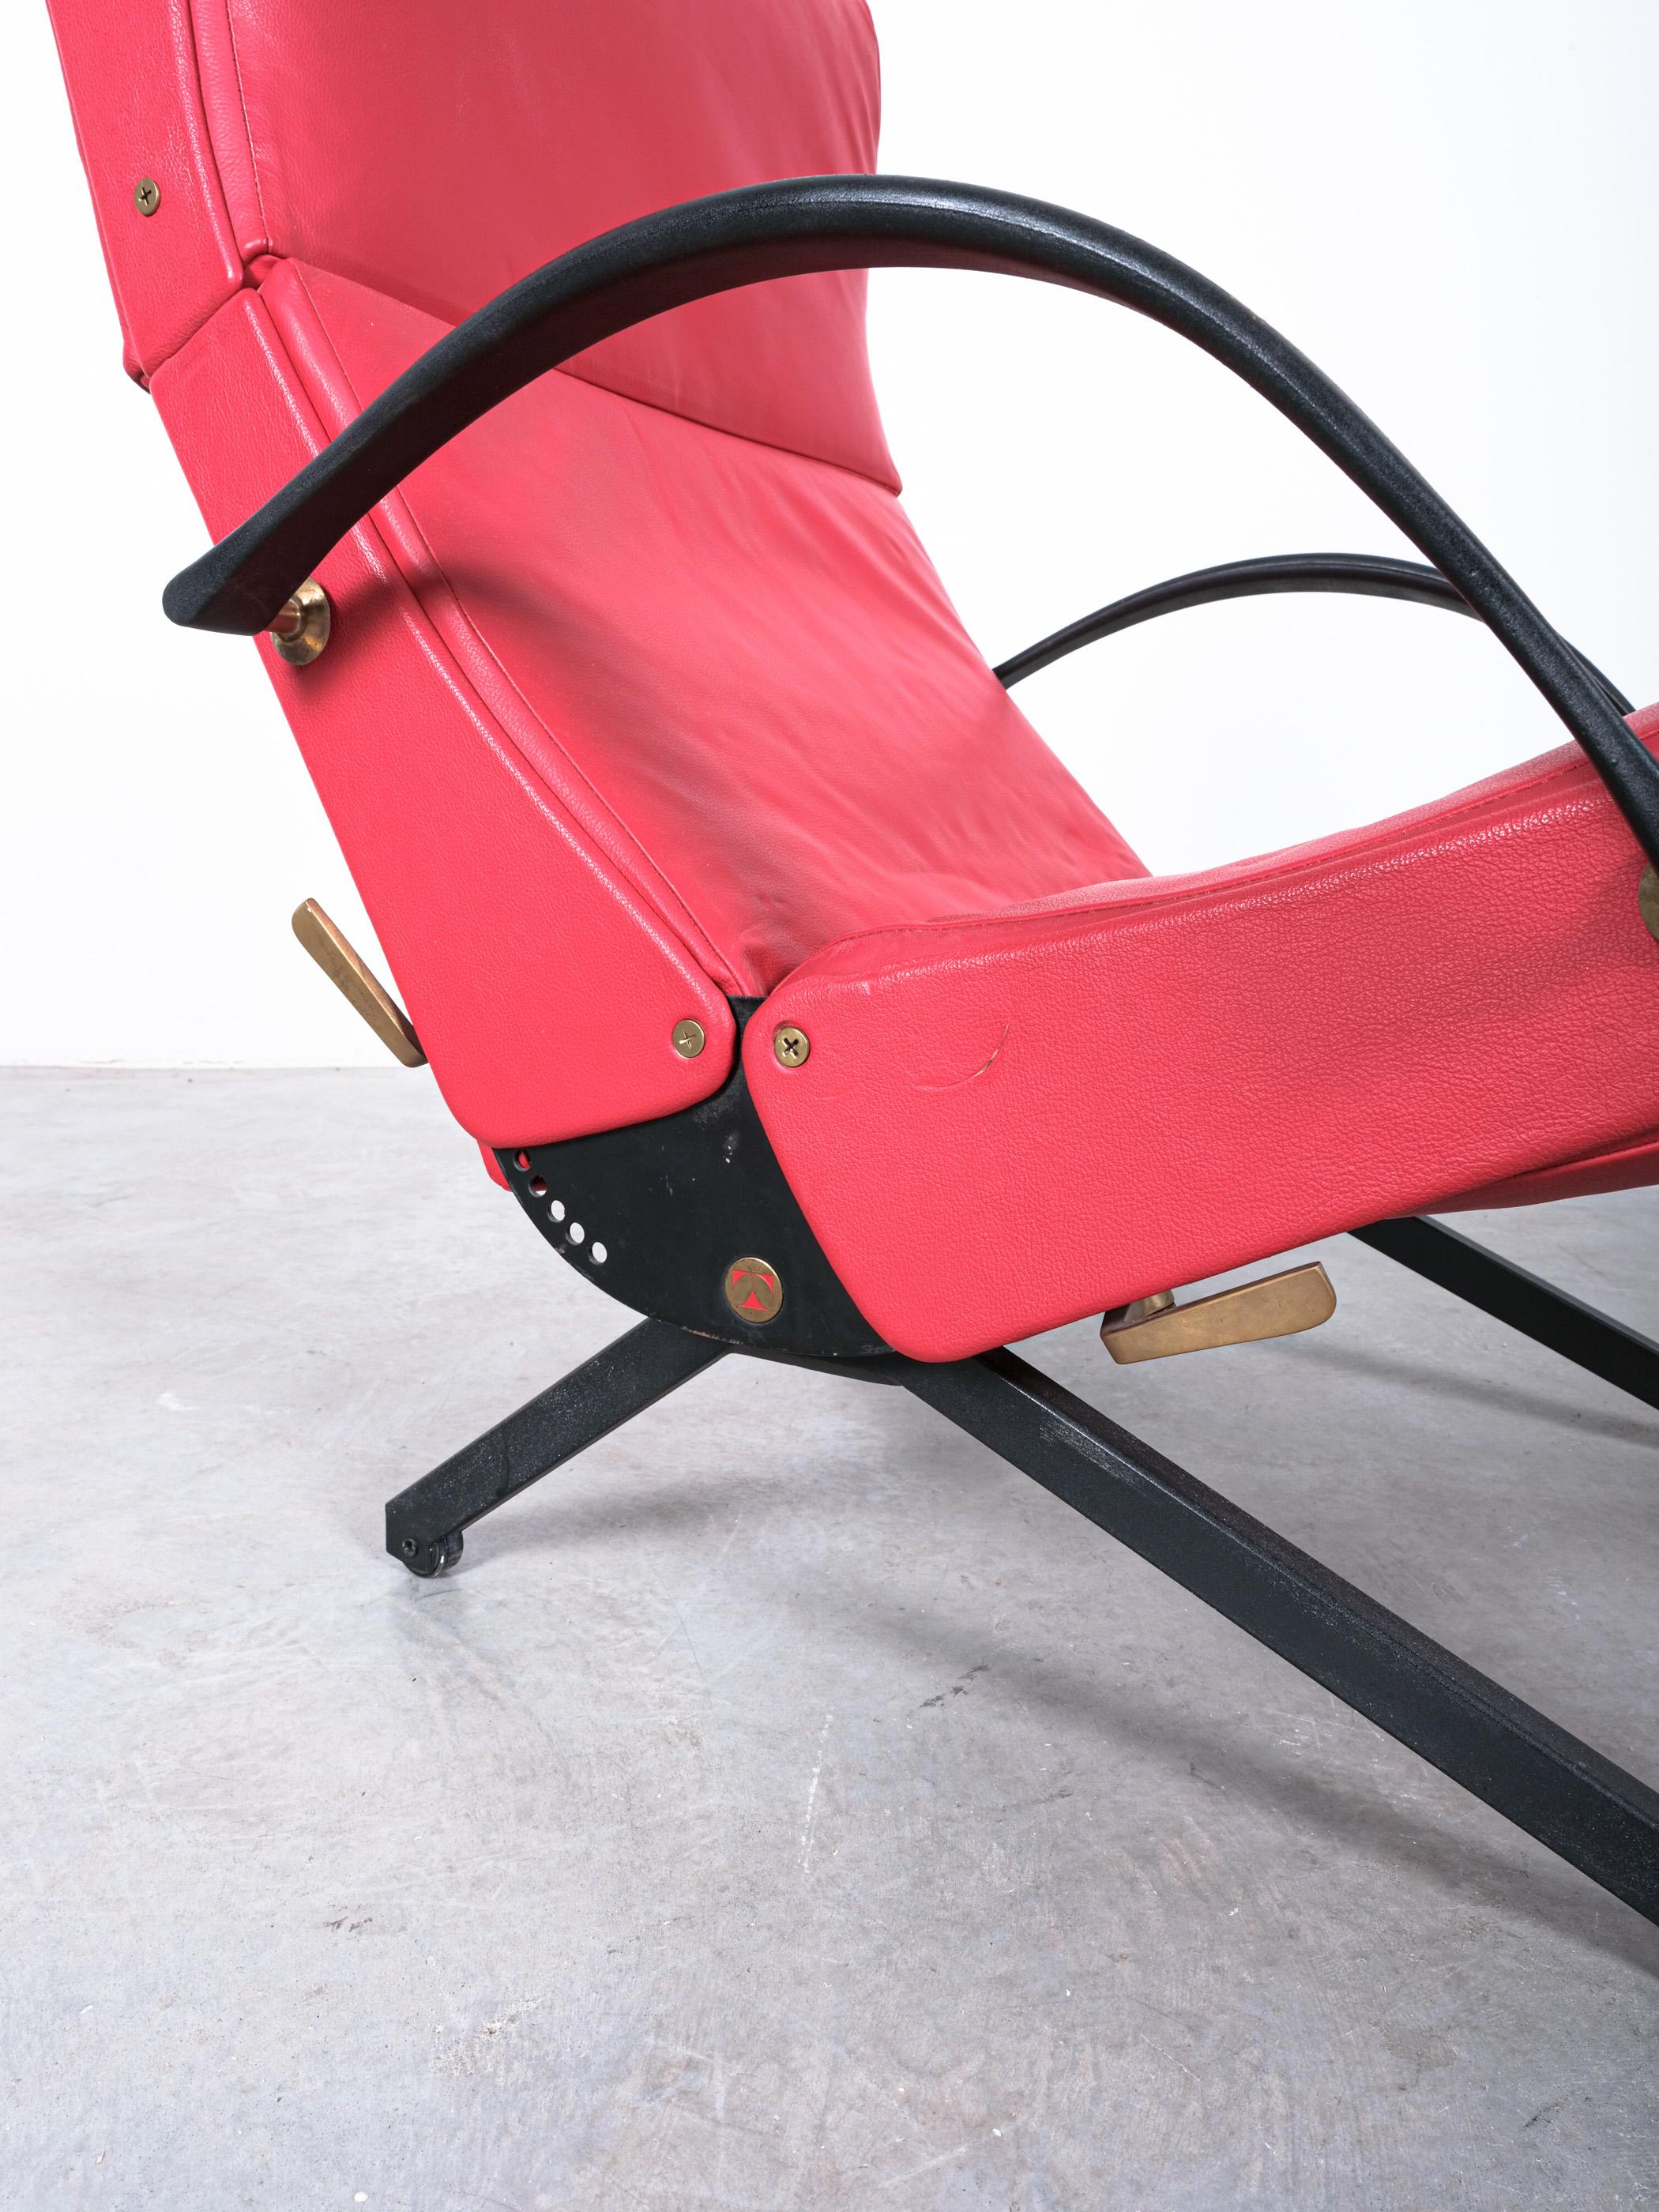 Metal Osvaldo Borsani P40 Relaxing Leather Armchair Red Leather, Tecta, 1950, Italy For Sale